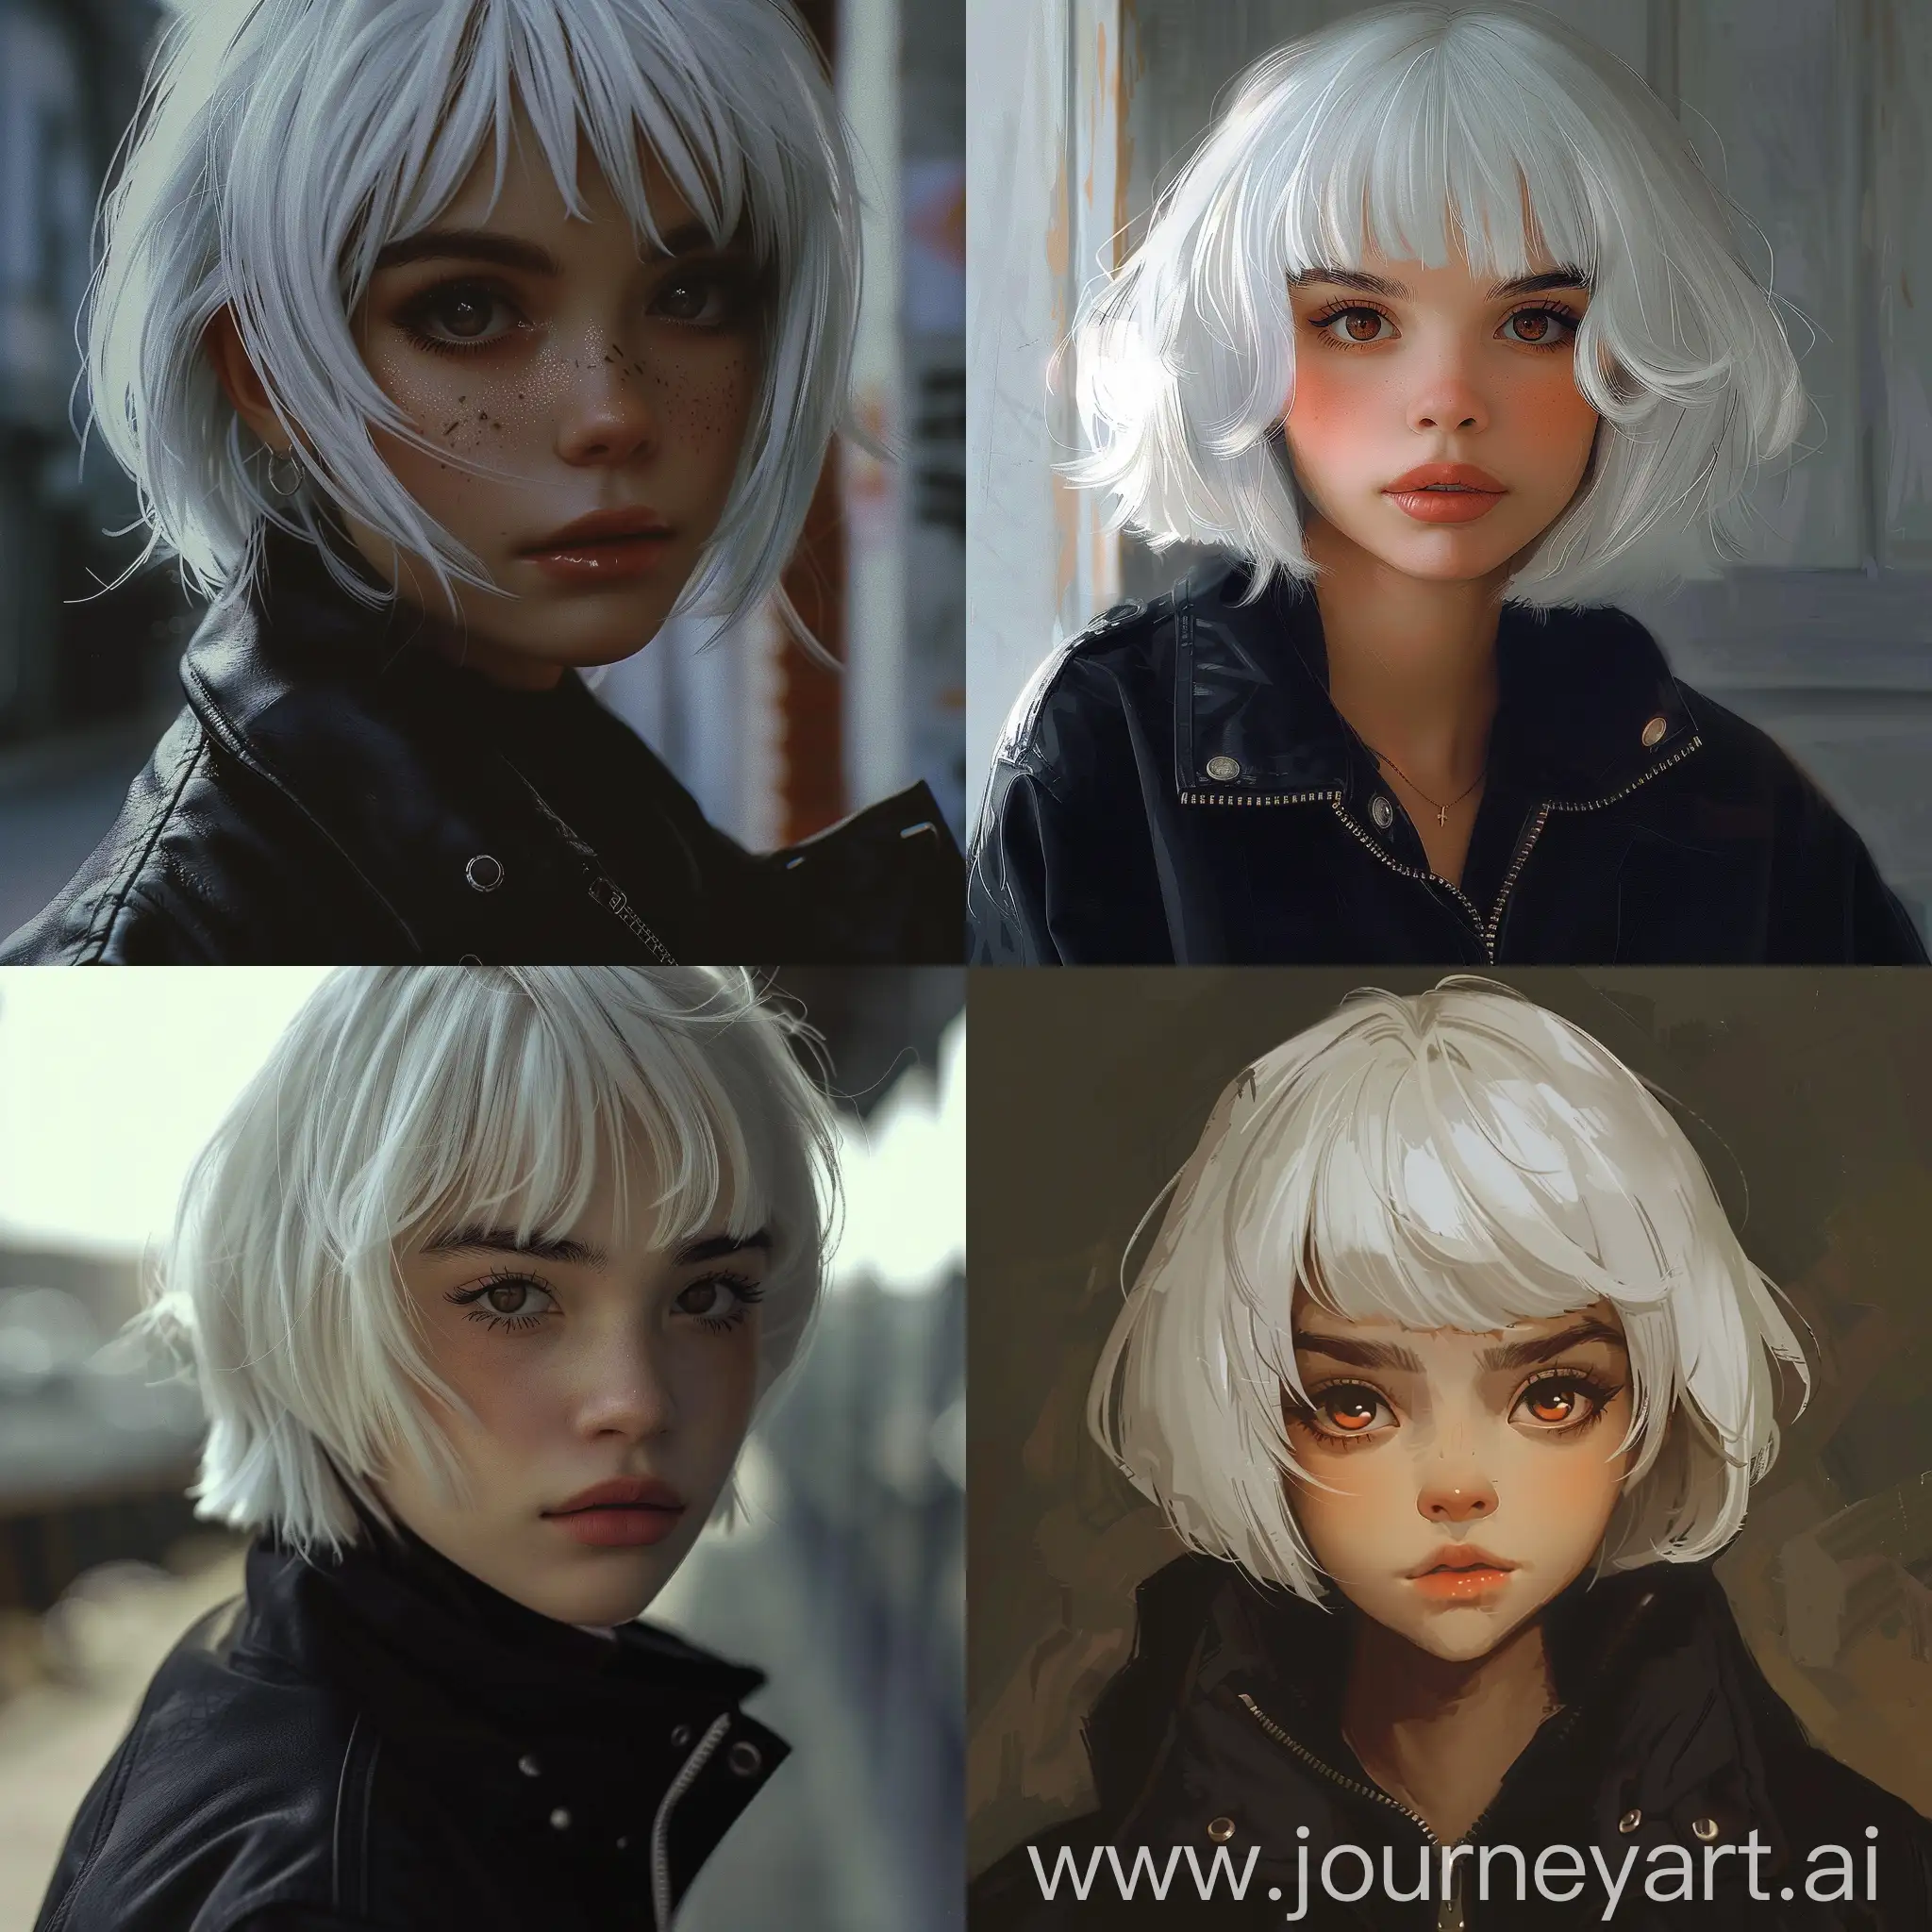 Badass-Young-Woman-with-Short-White-Hair-in-Detailed-Black-Jacket